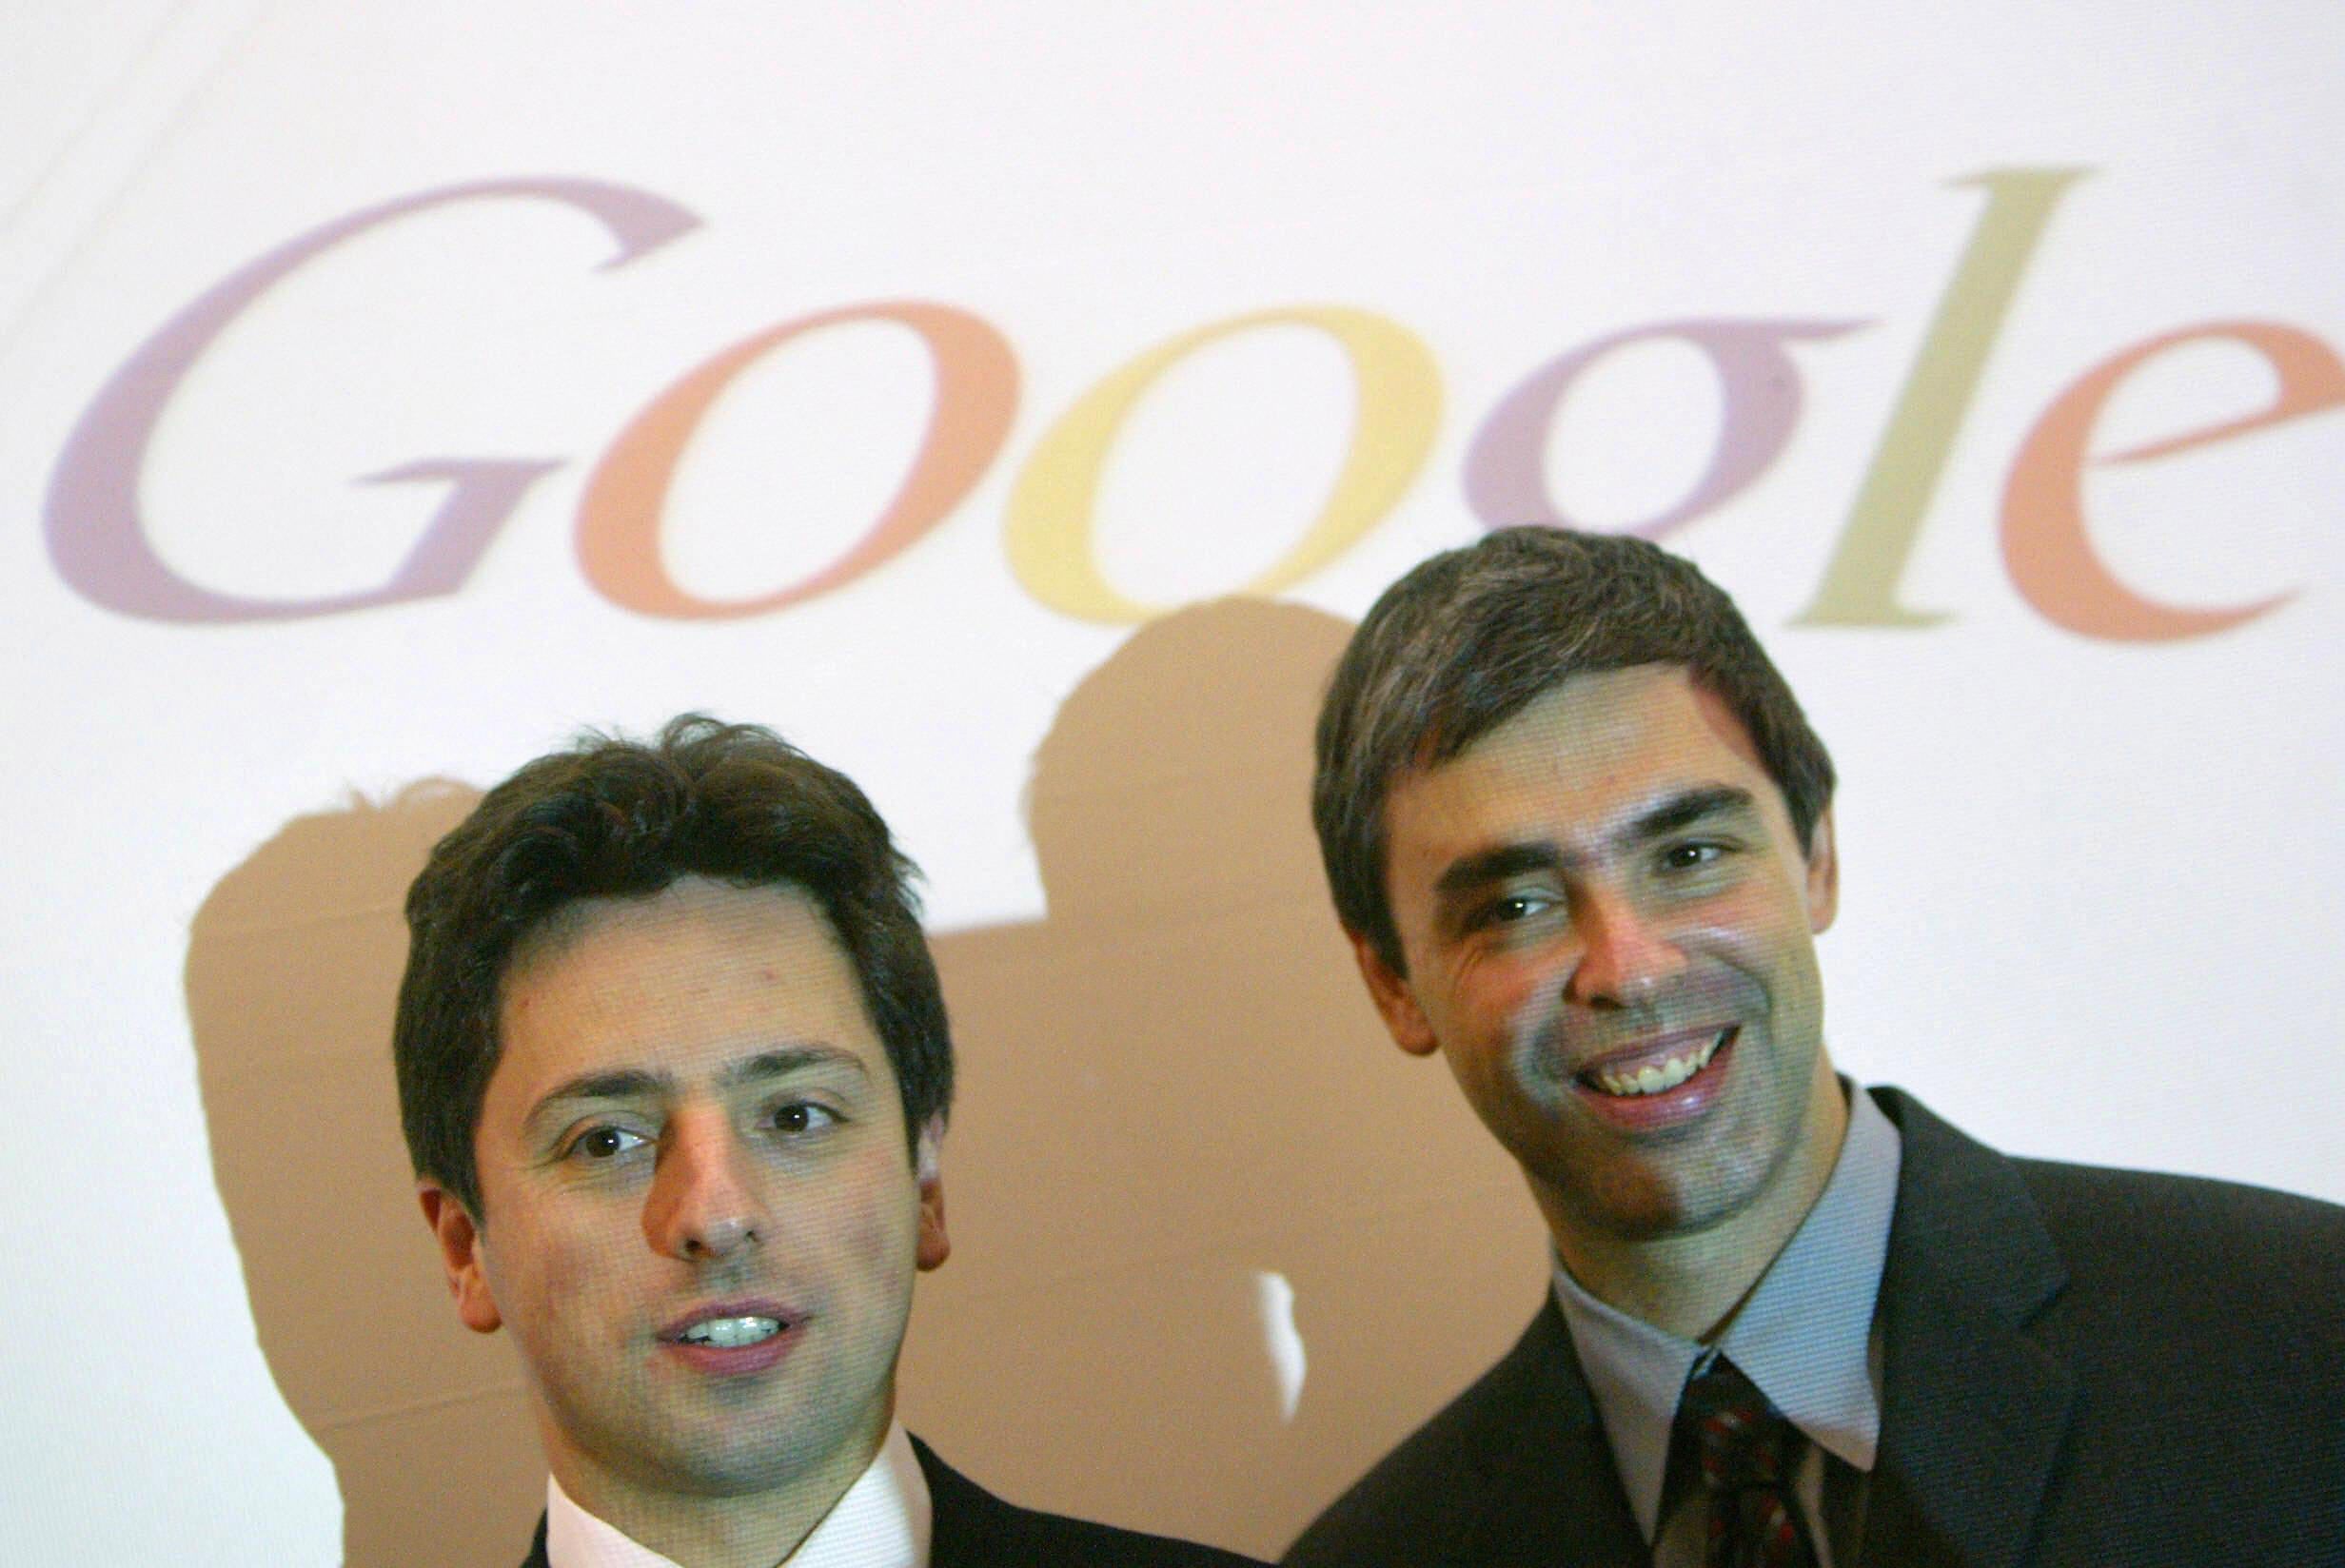 Google co-founders Sergey Brin, left, and Larry Page. (John MacDougall—AFP/Getty Images)